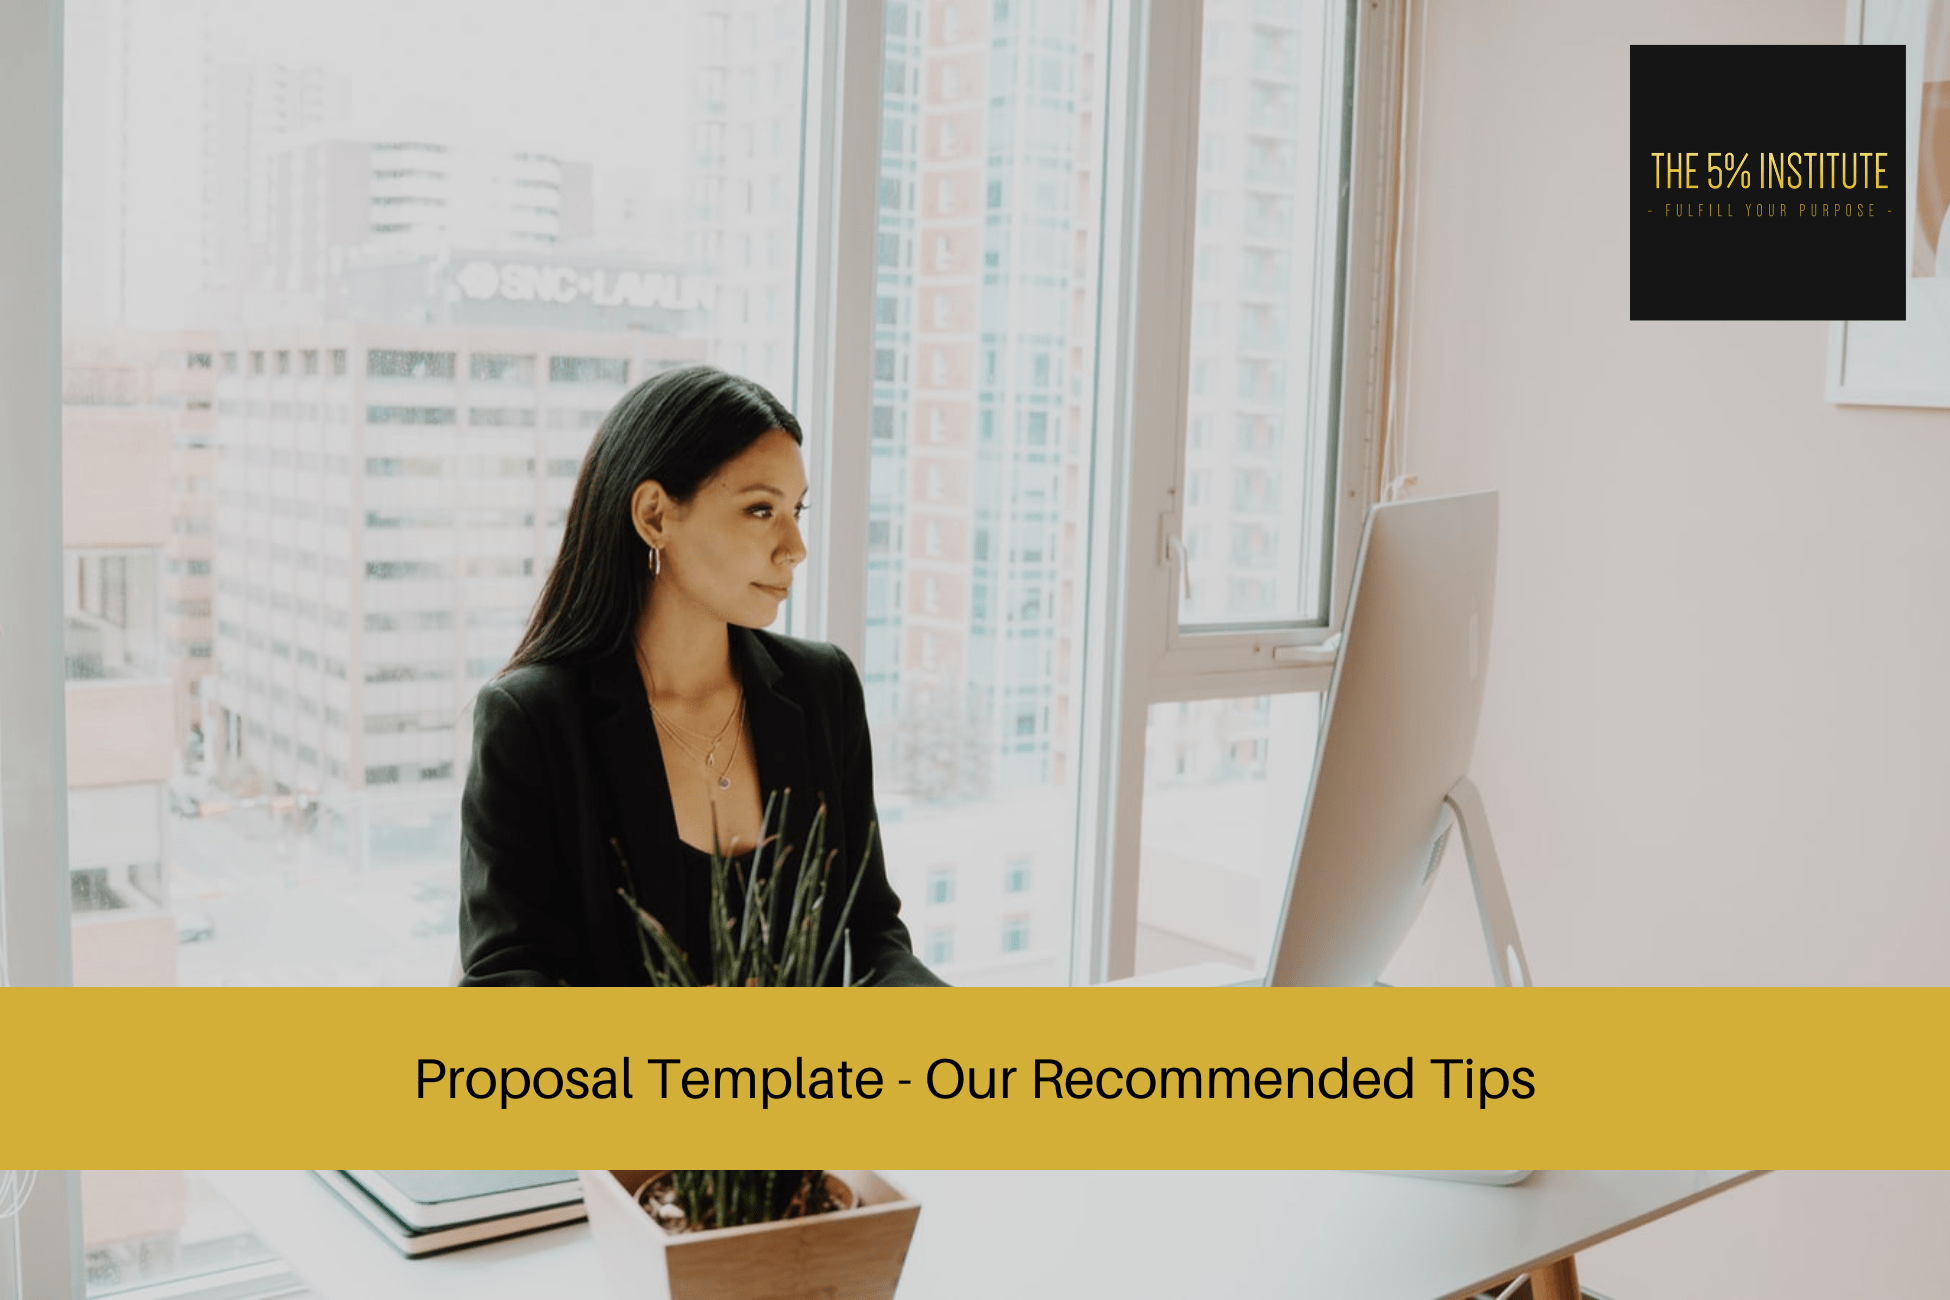 Proposal Template - Our Recommended Tips